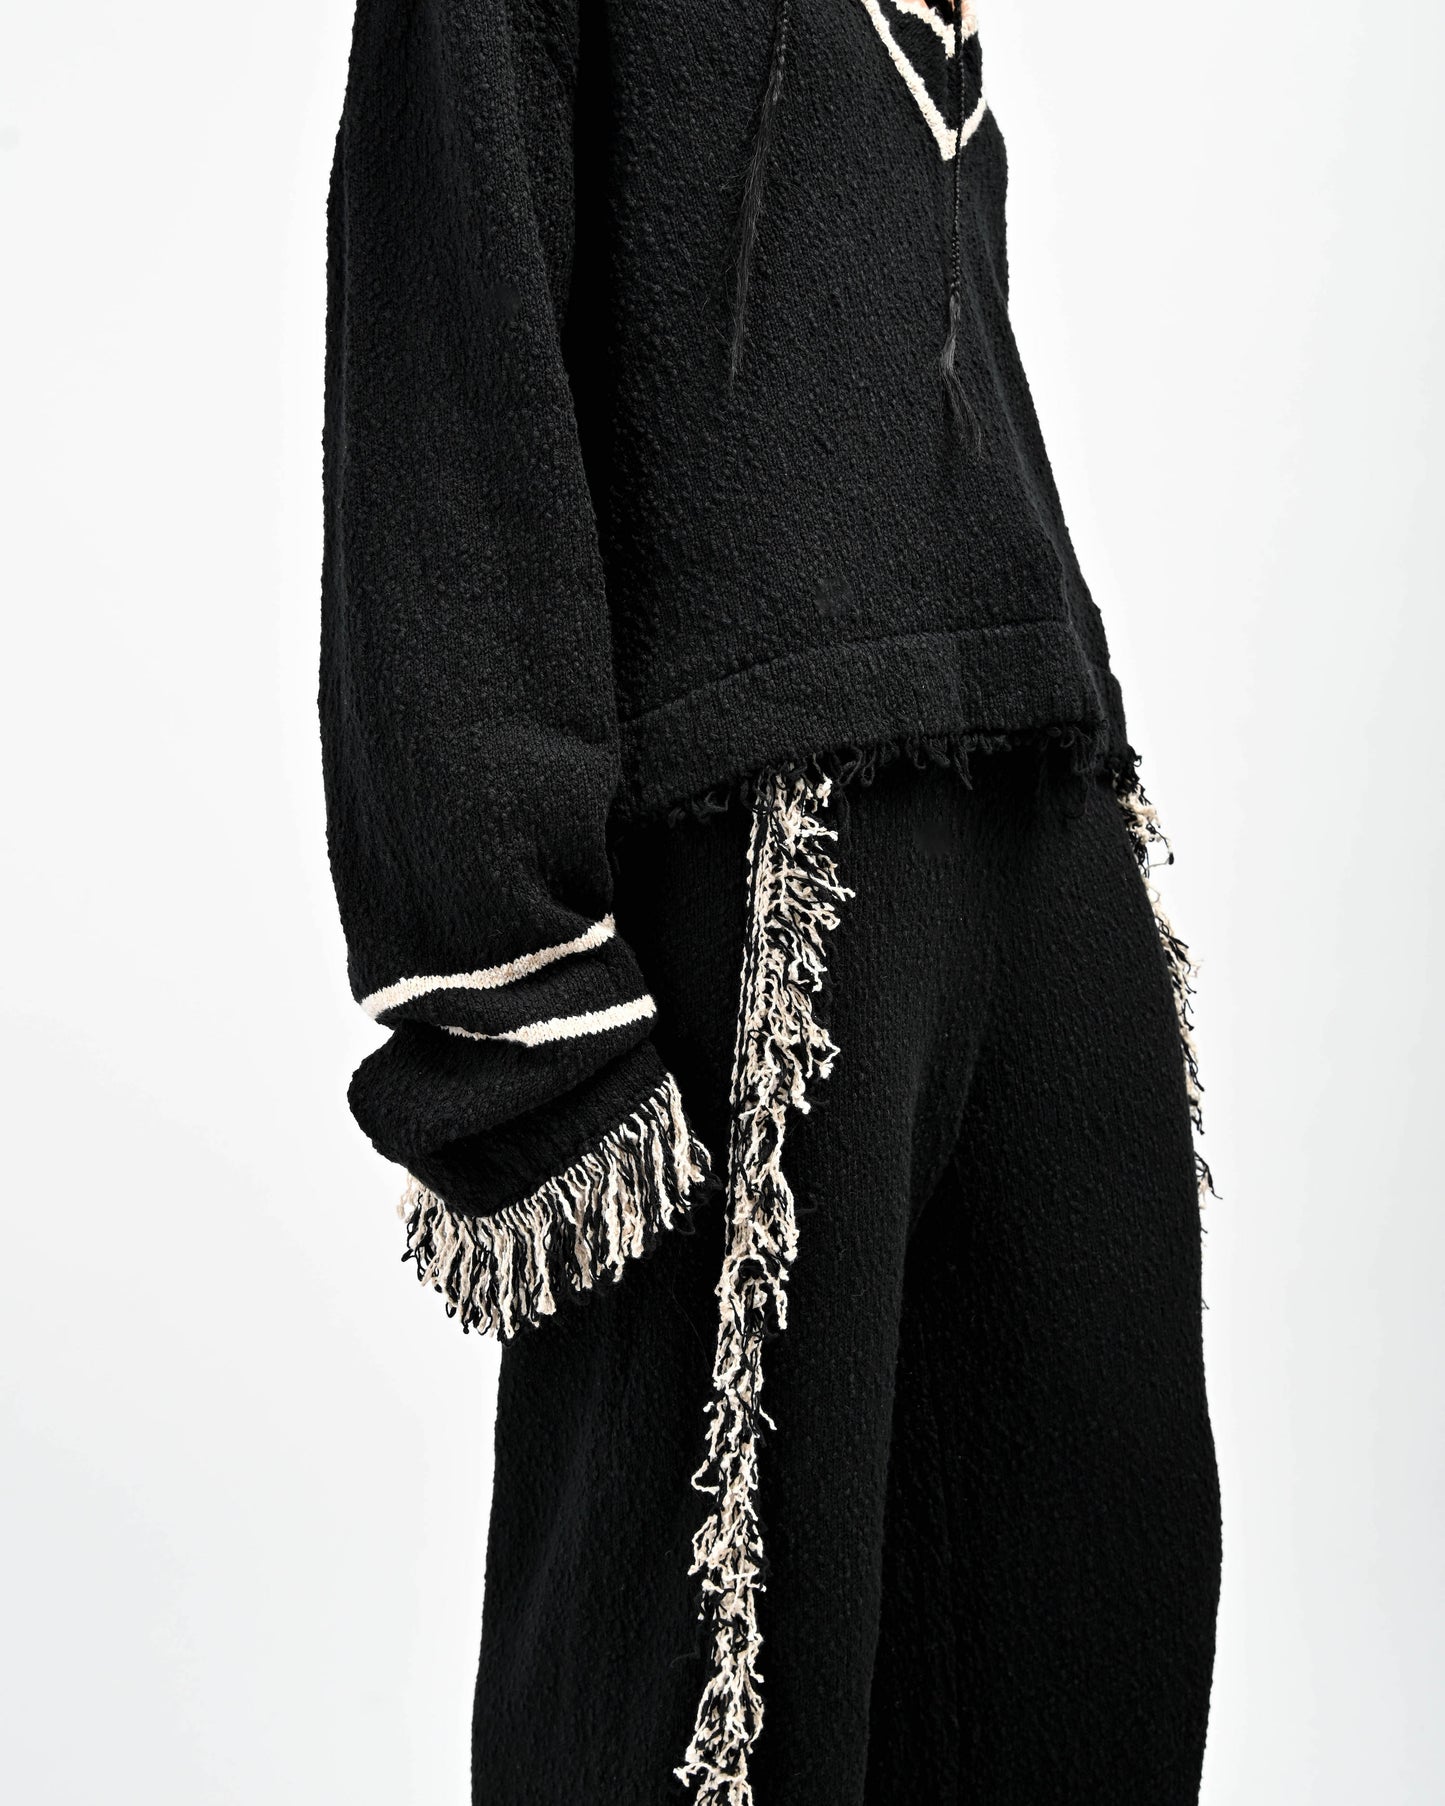 Detail view of Stripe accents and Fringe Detail on Andy Fringe Knit Set in Black and Oatmeal by Aseye Studio